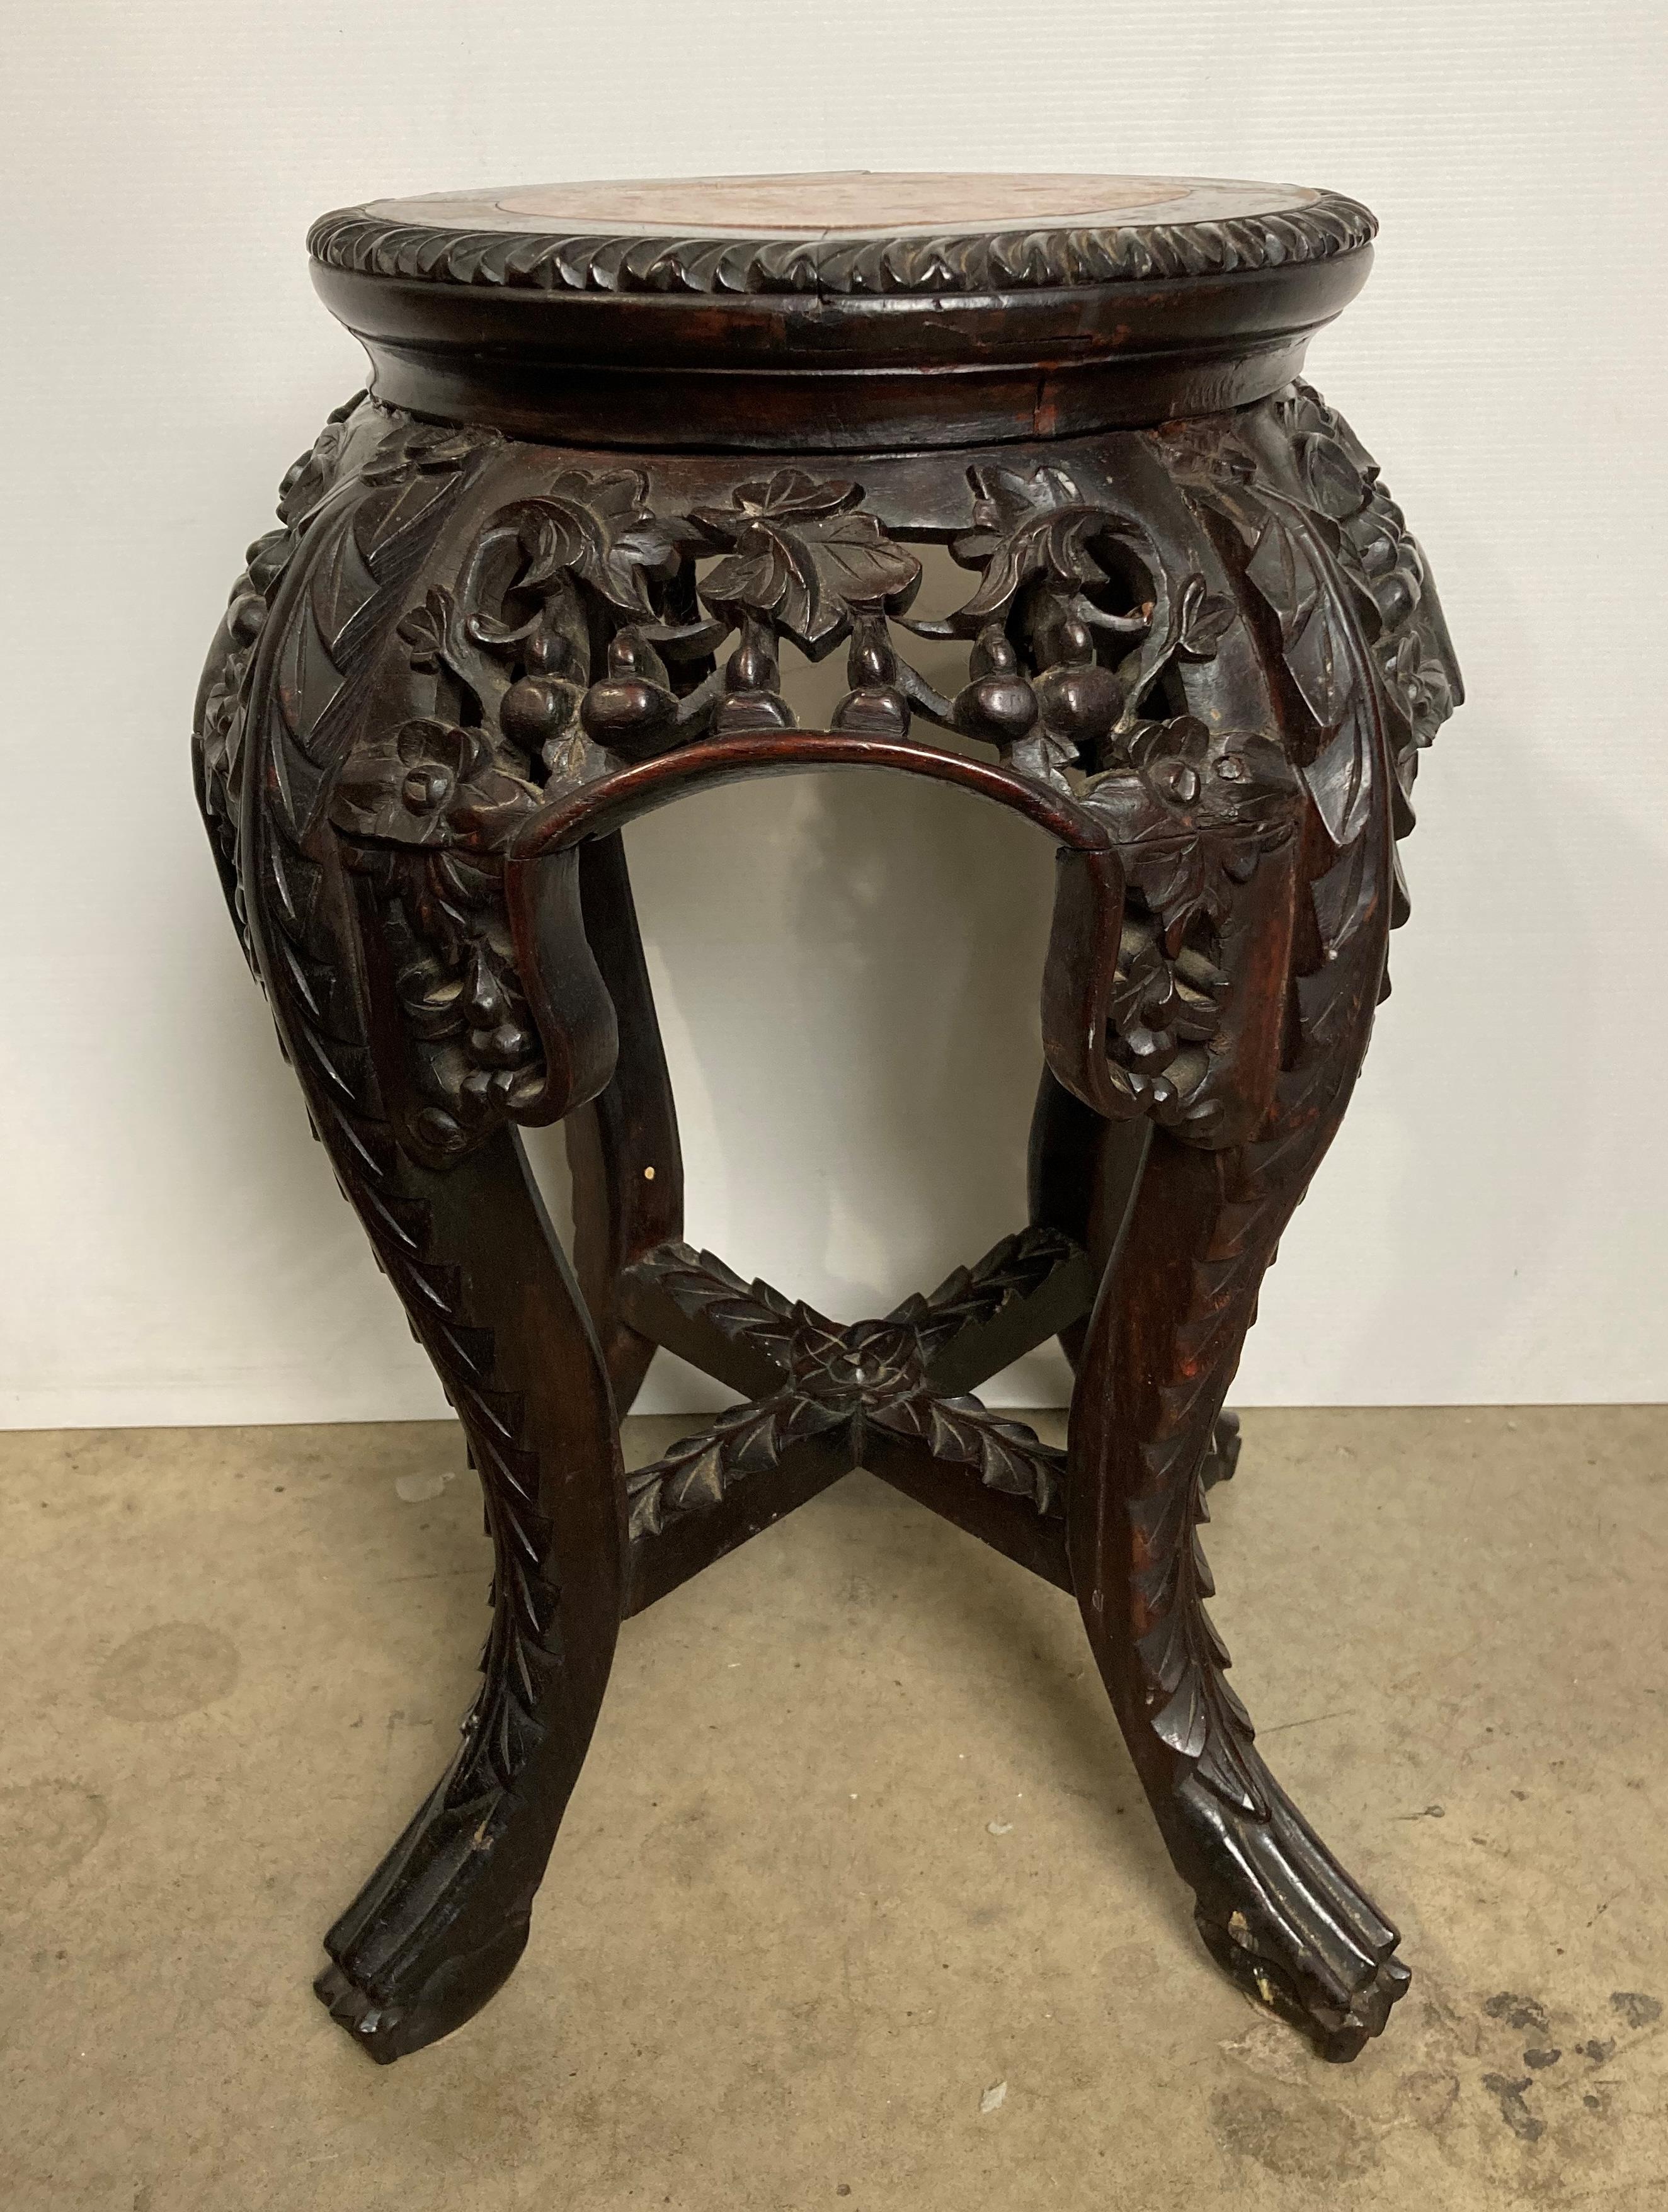 A small Oriental wooden hand-carved marble-topped plant stand/jardiniere with carved plants/flowers - Image 2 of 5